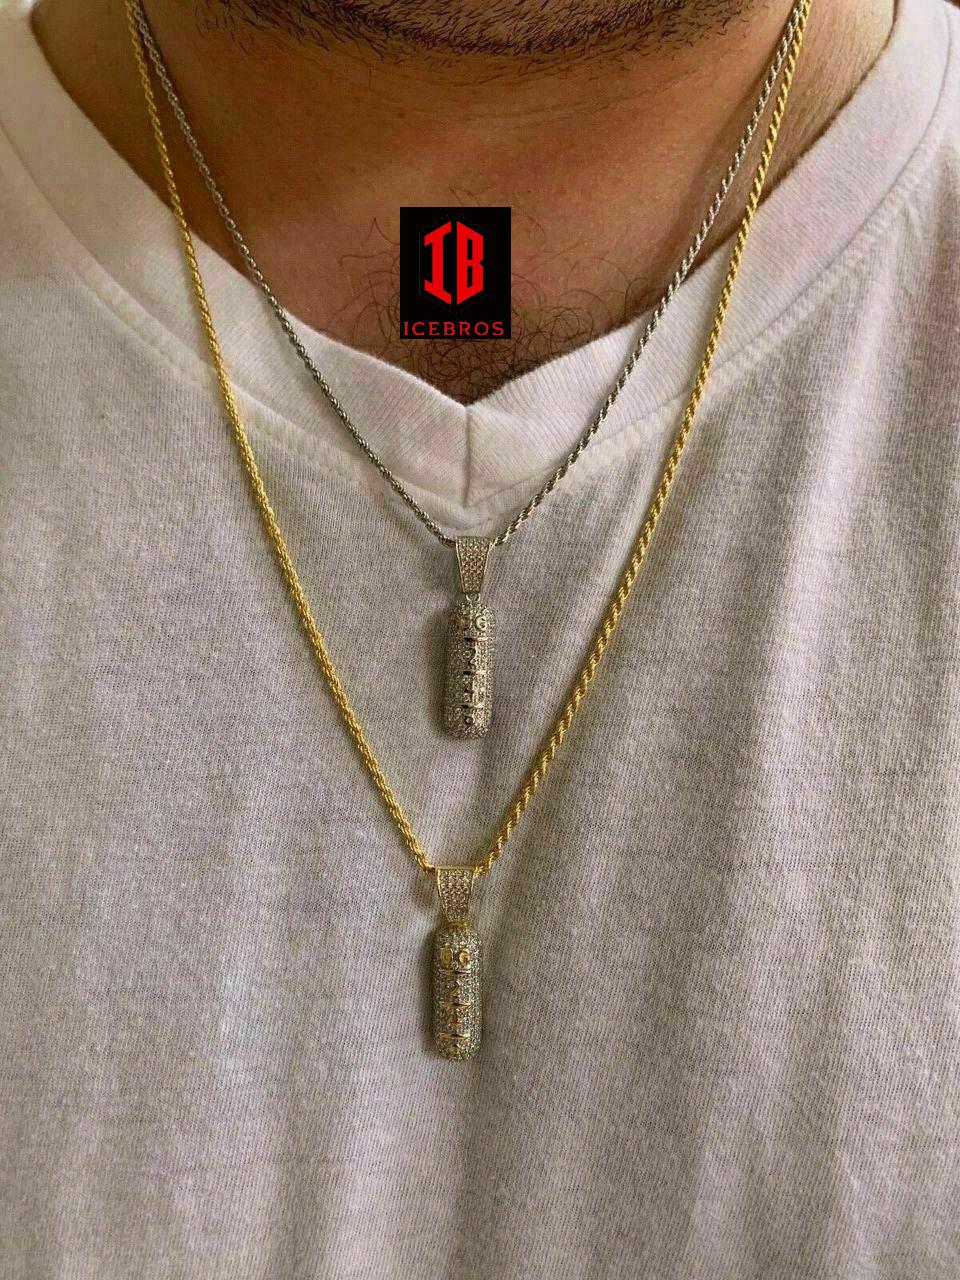 925 Silver 14k Gold Plated Zanny Pill Bar Pendant Necklace Lil Xan GG 249